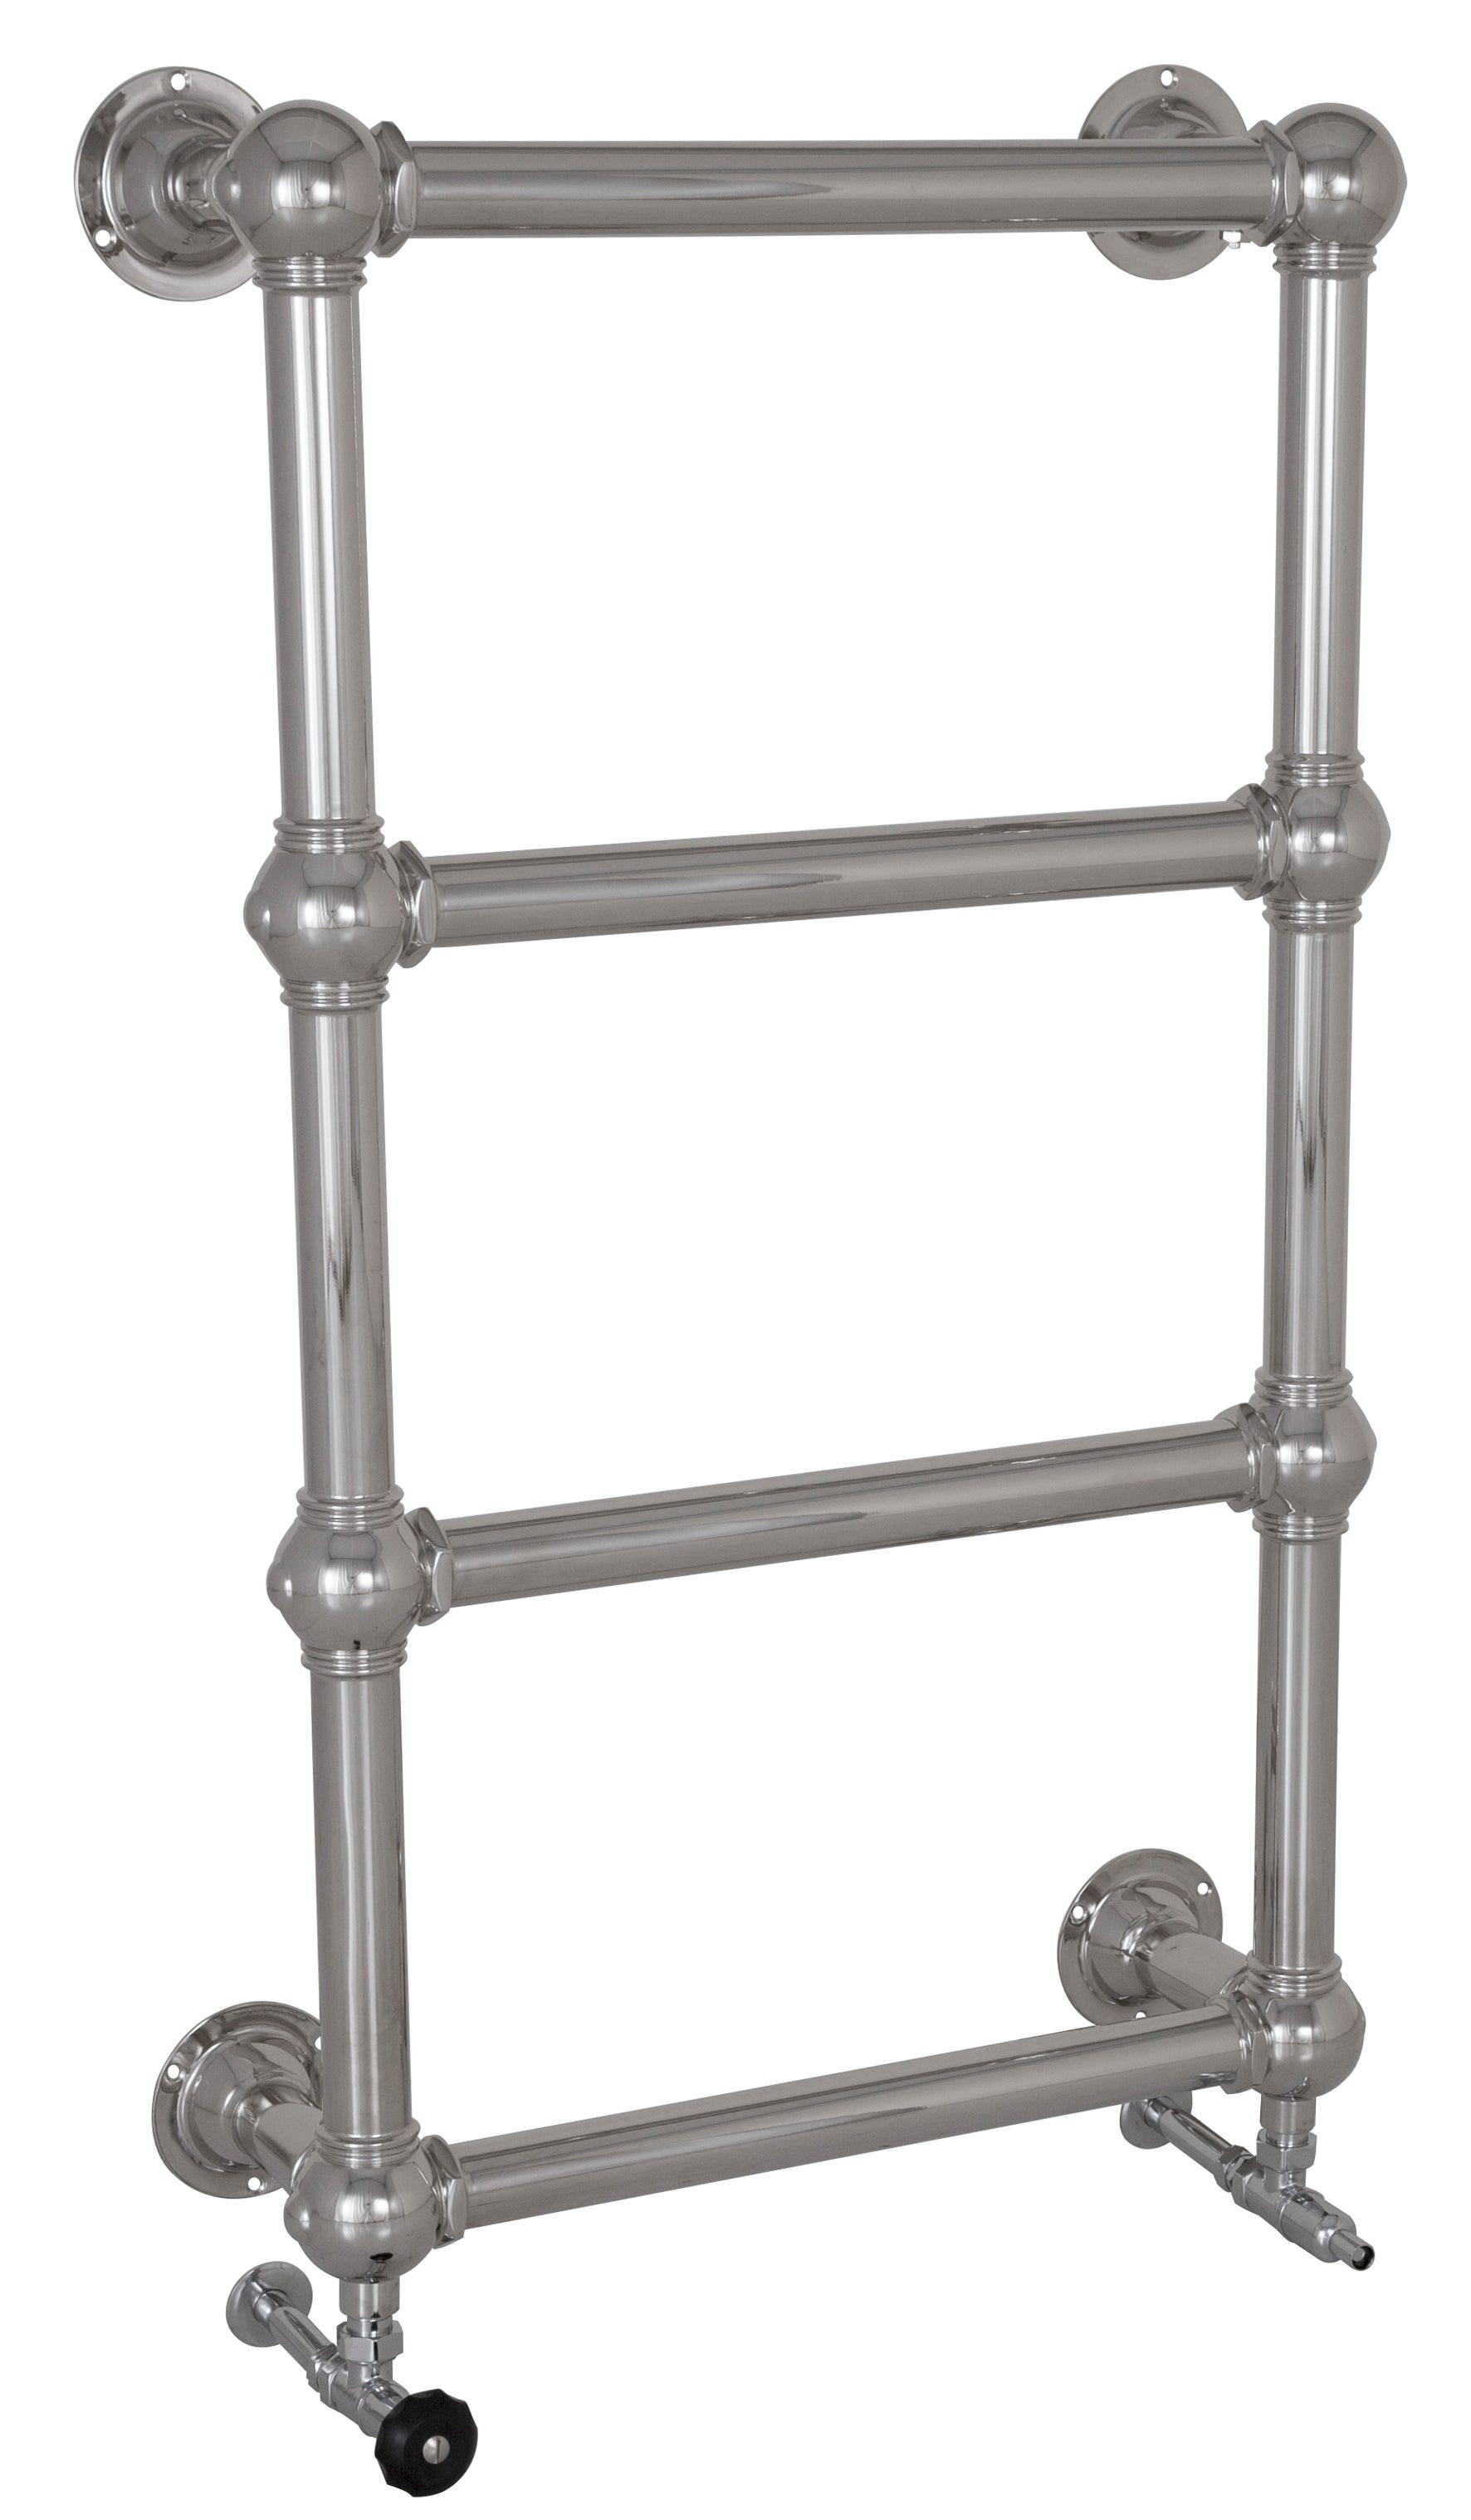 Colossus Wall Mounted Heated Towel Rail - Bilden Home & Hardware Market